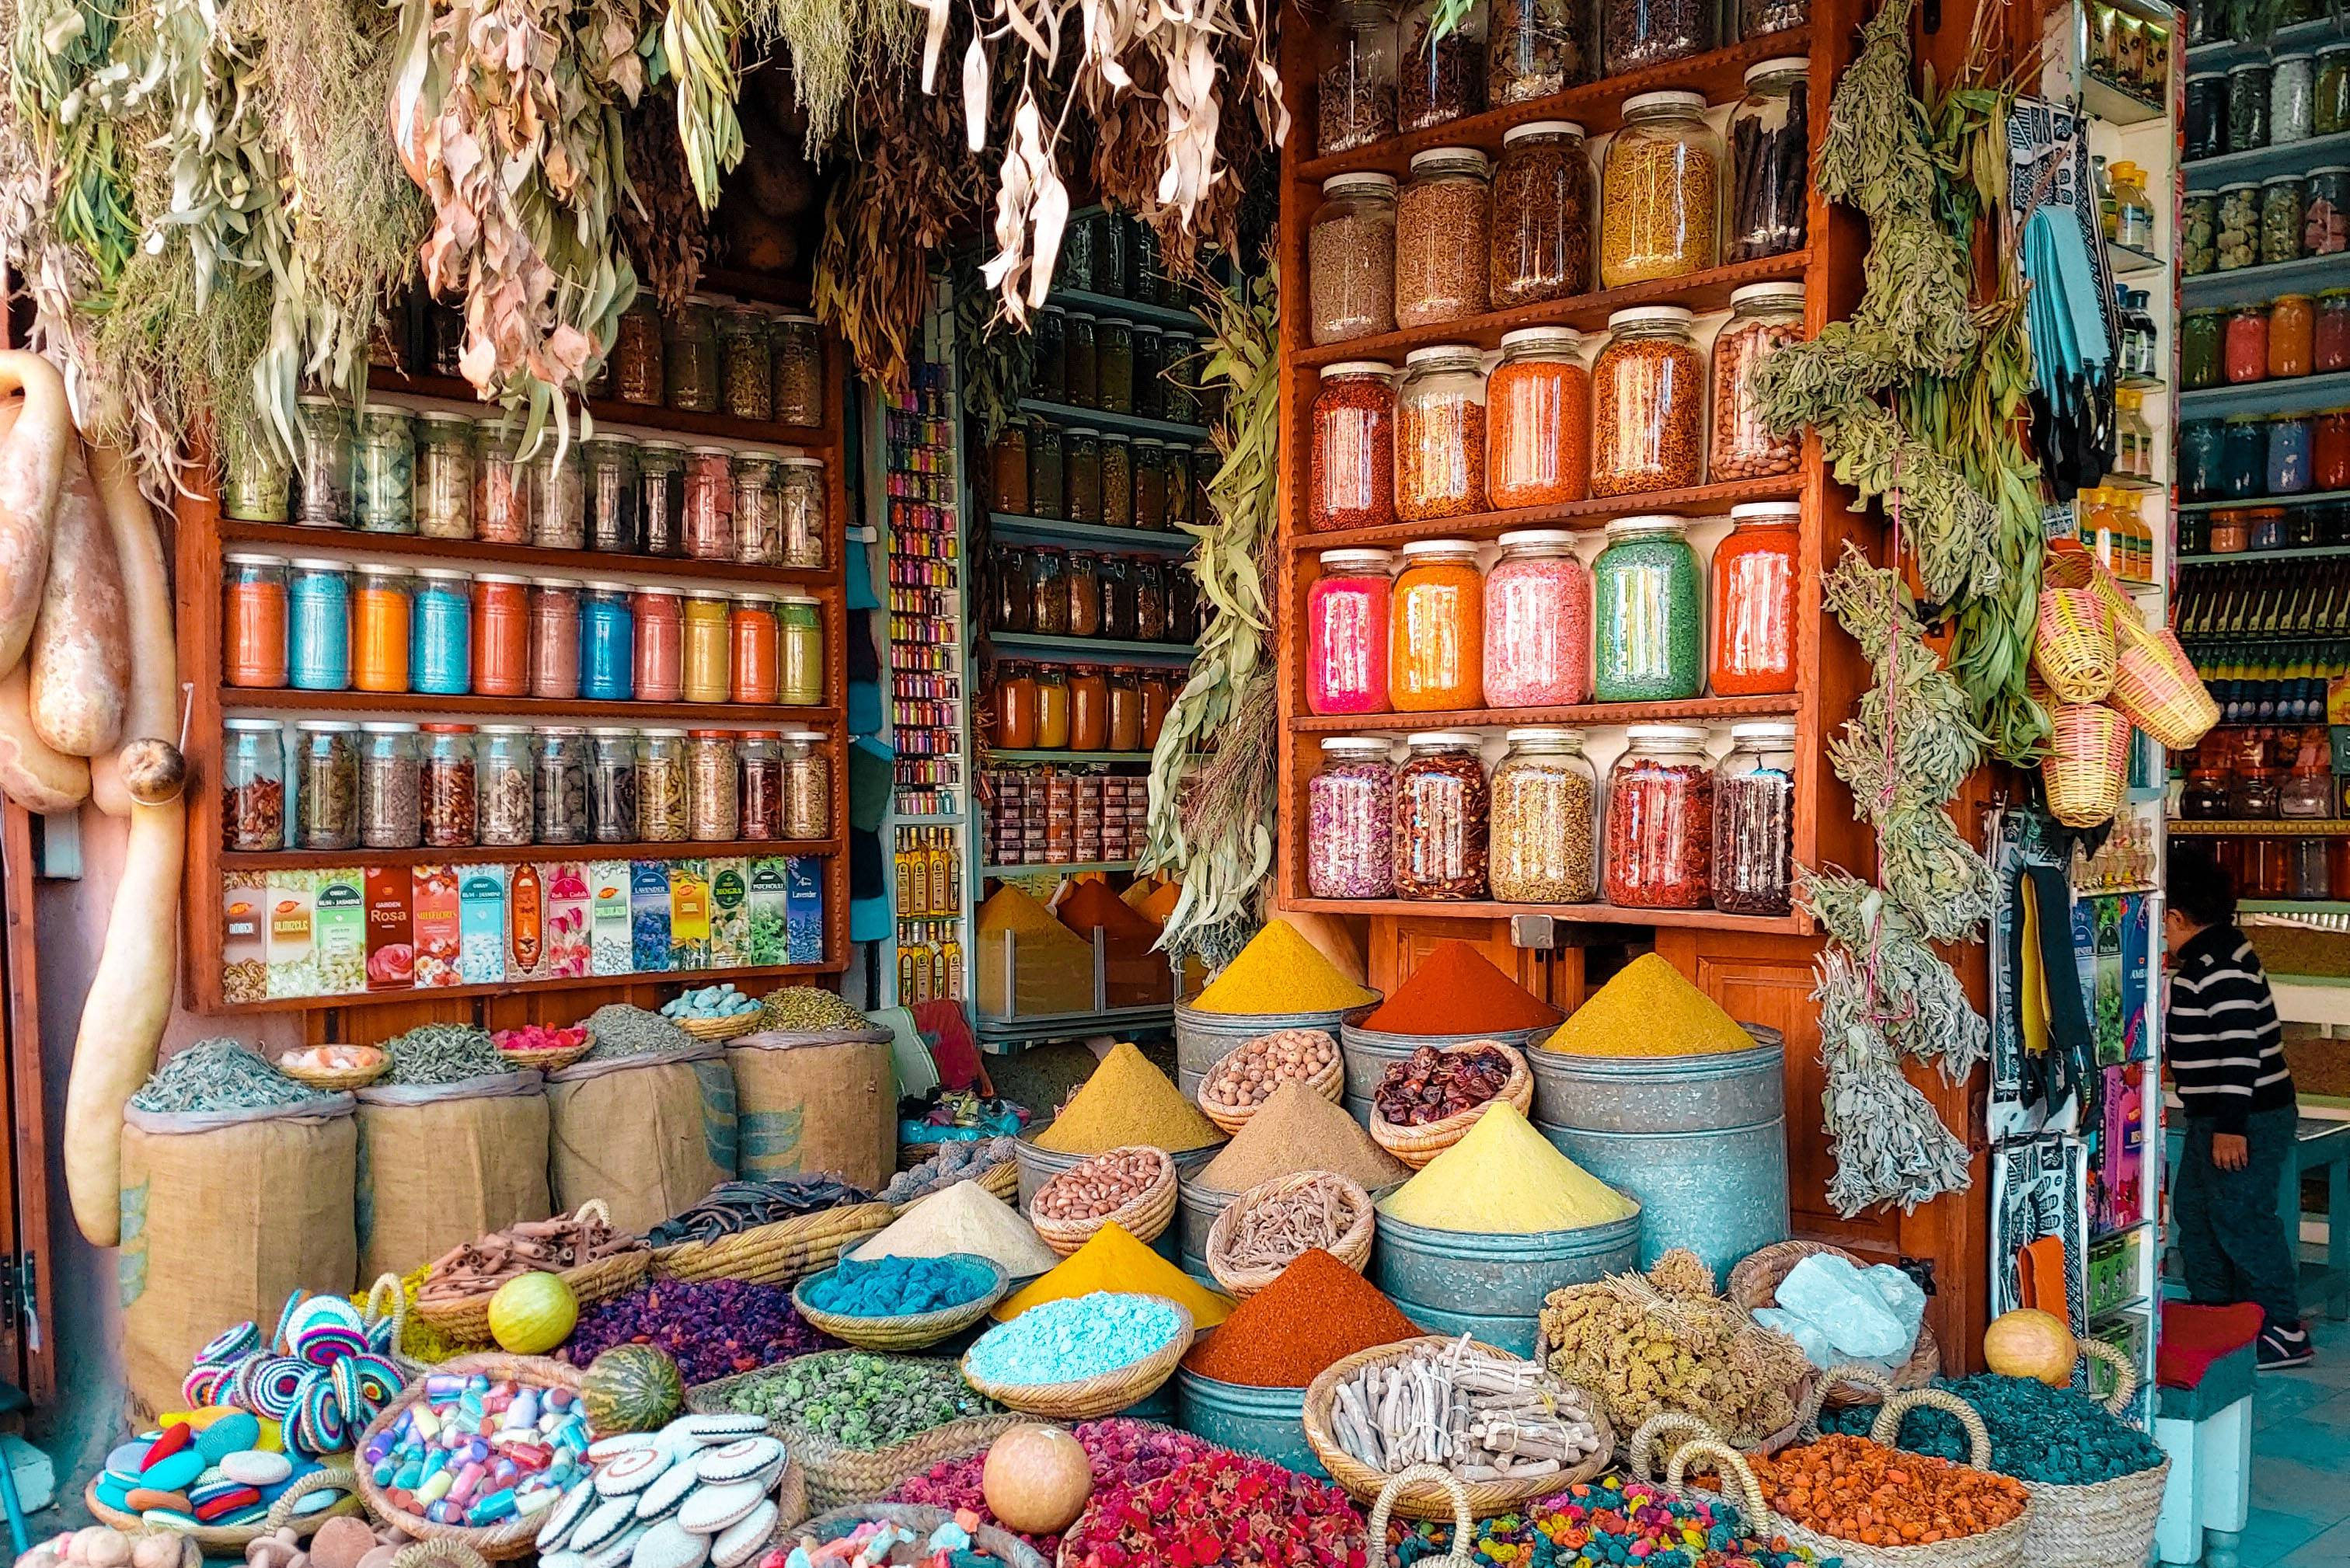 Traditional goods and colourful baskets outside a shop in Morocco